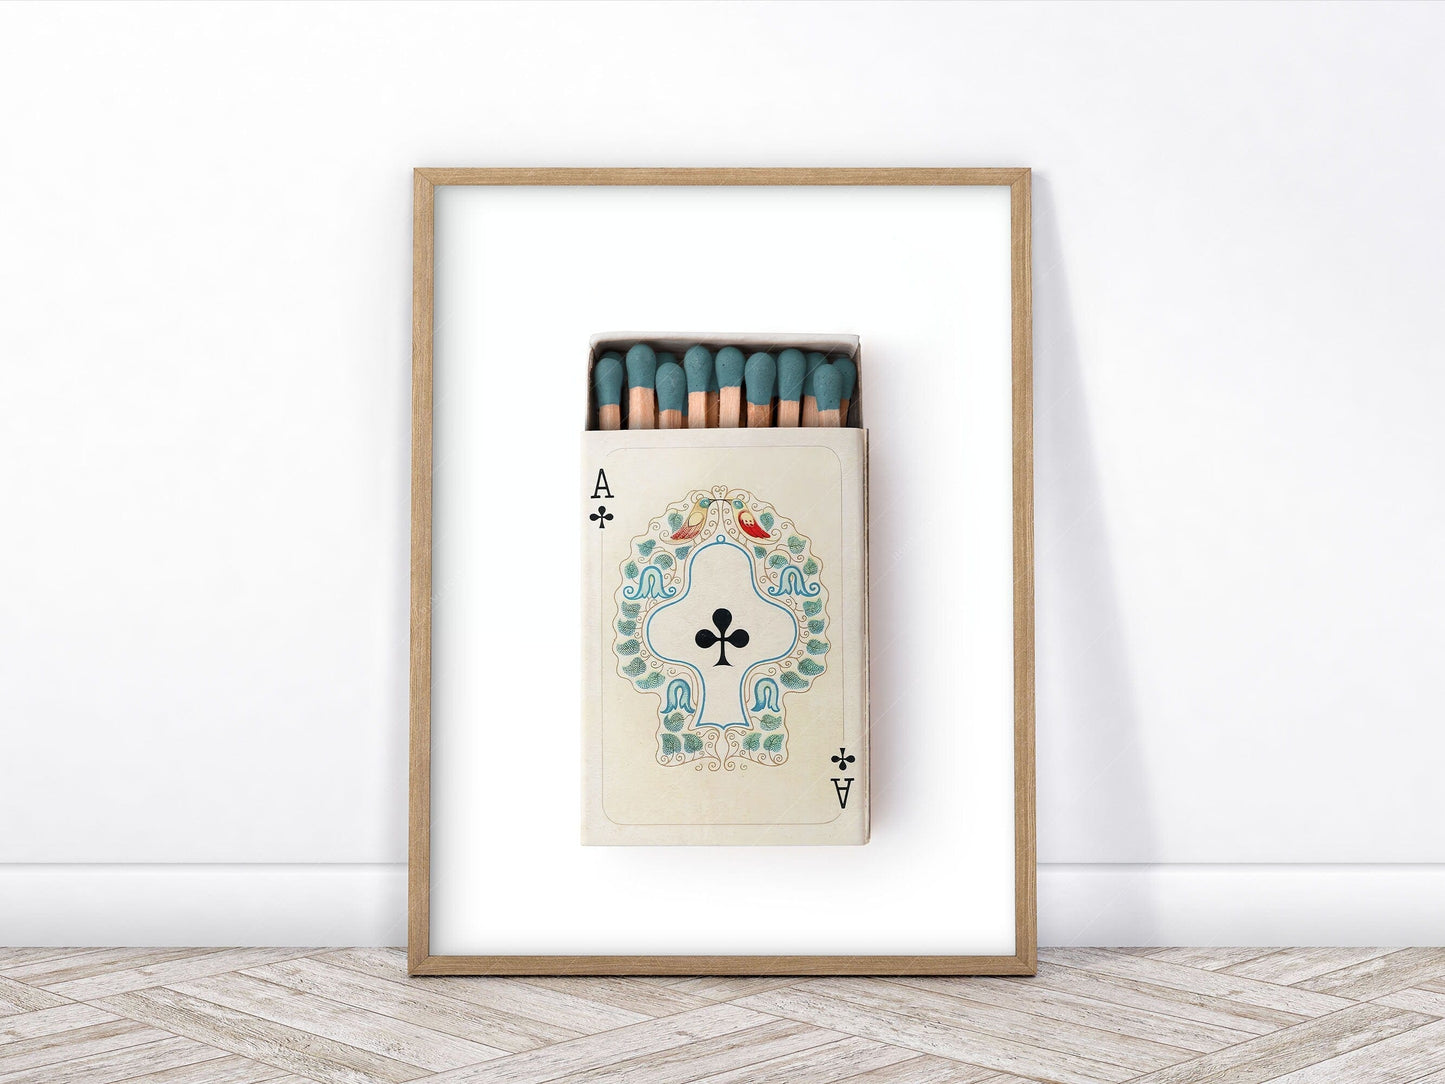 Home Poster Decor Ace of clubs Playing cards poster Retro wall art Aesthetic room Vintage matchbox photography Chic home decor Eclectic Print Gift for her him